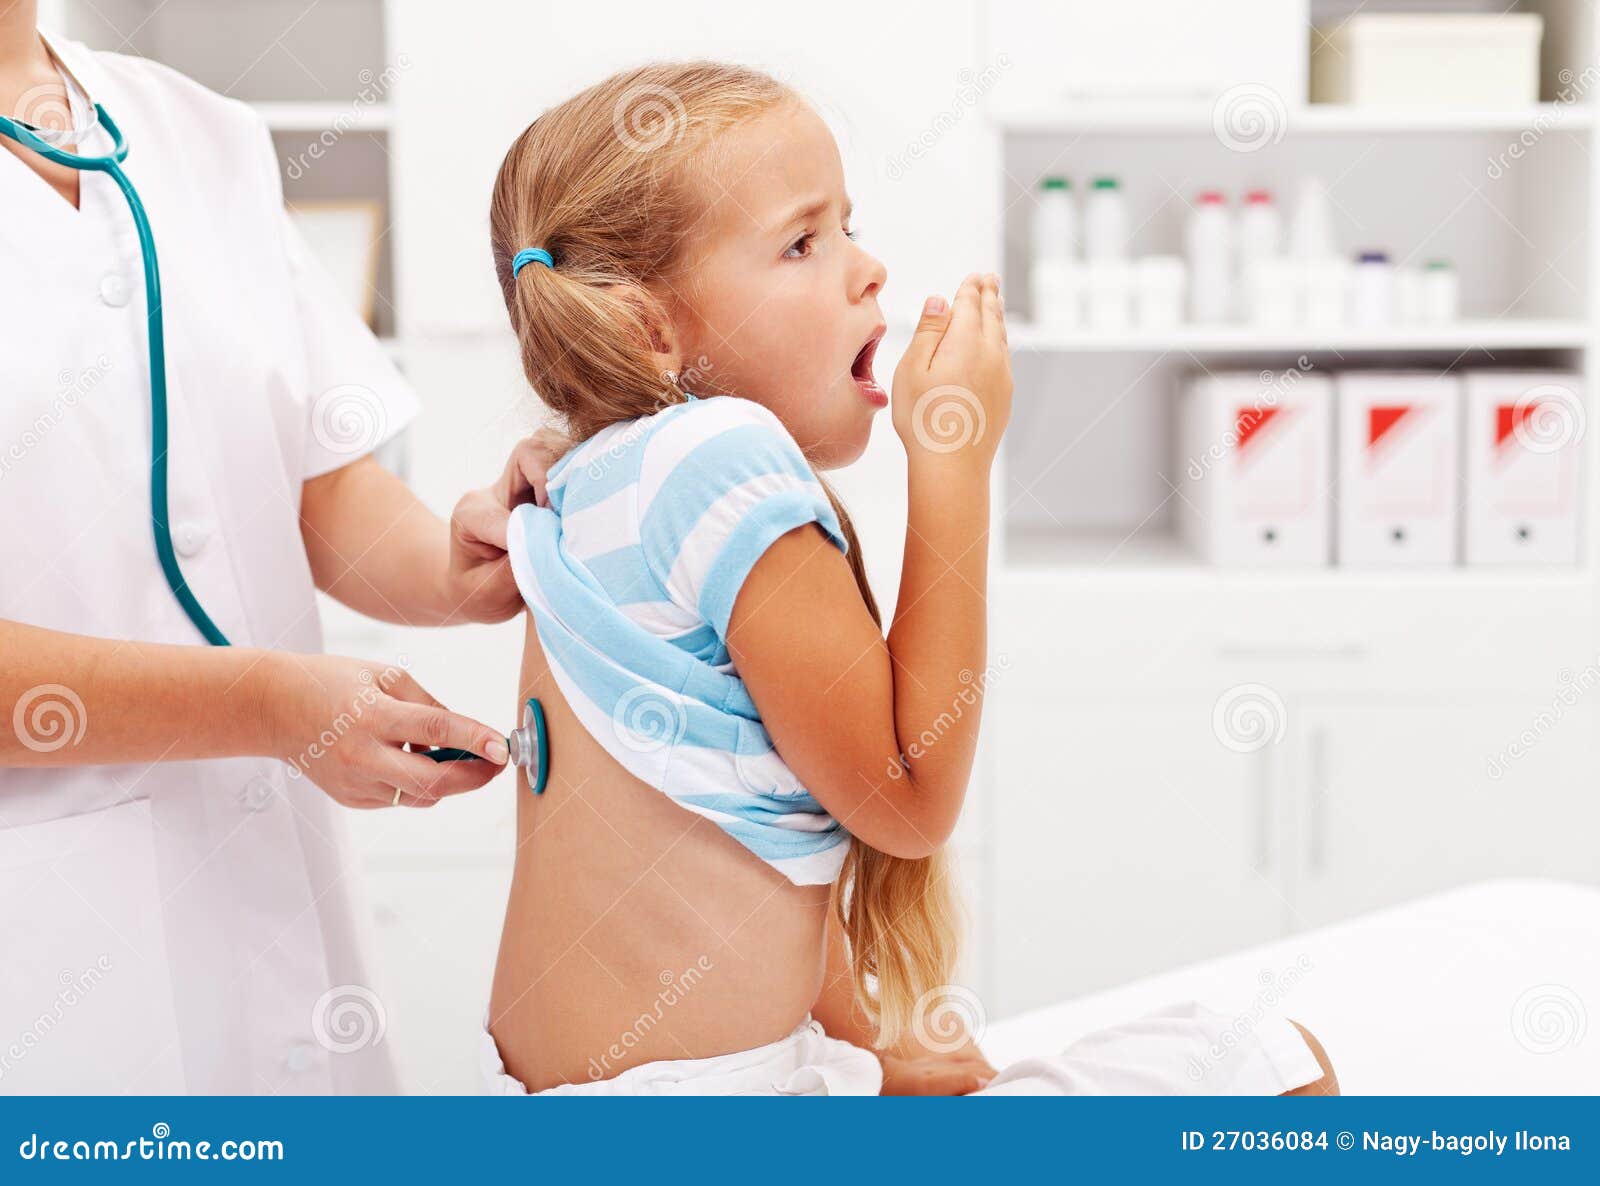 little girl coughing at the doctor